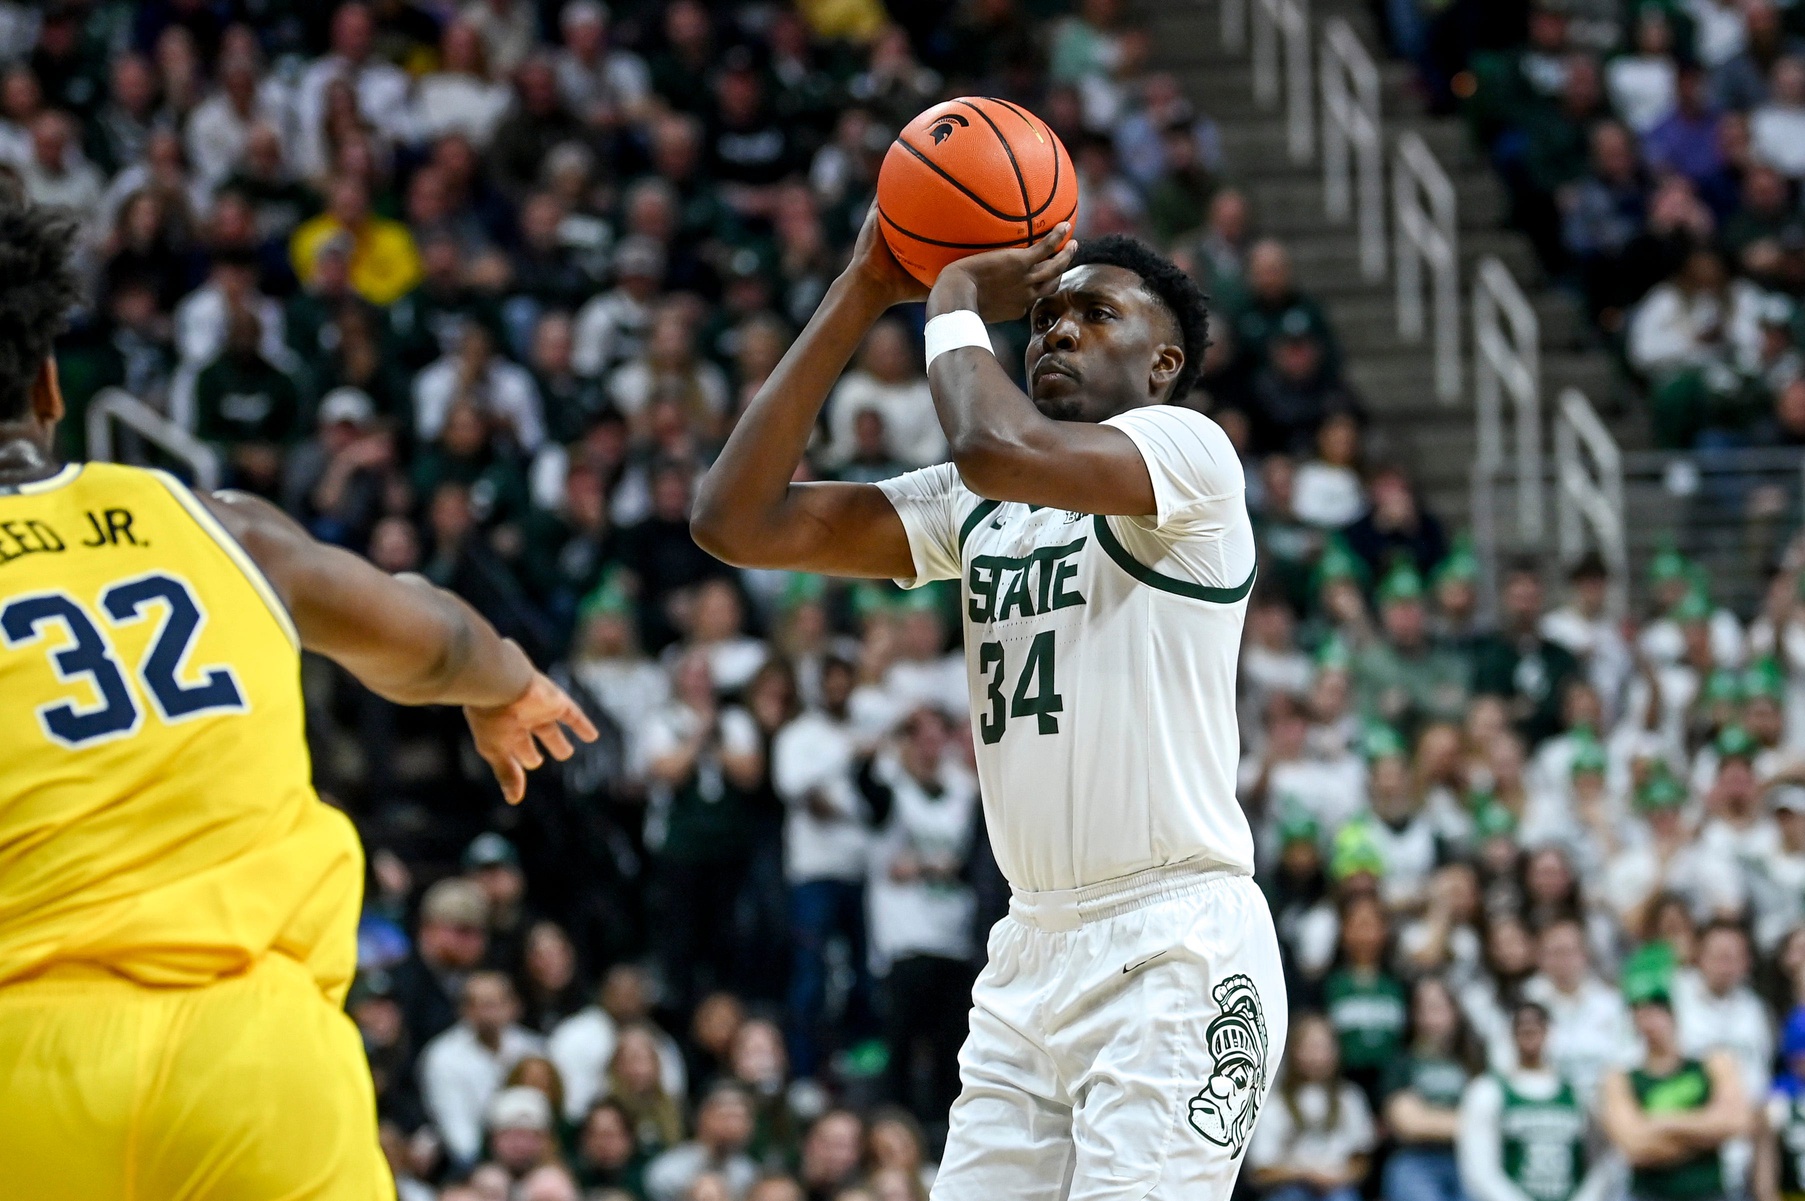 Xavier Booker takes a shot against rival Michigan at home.